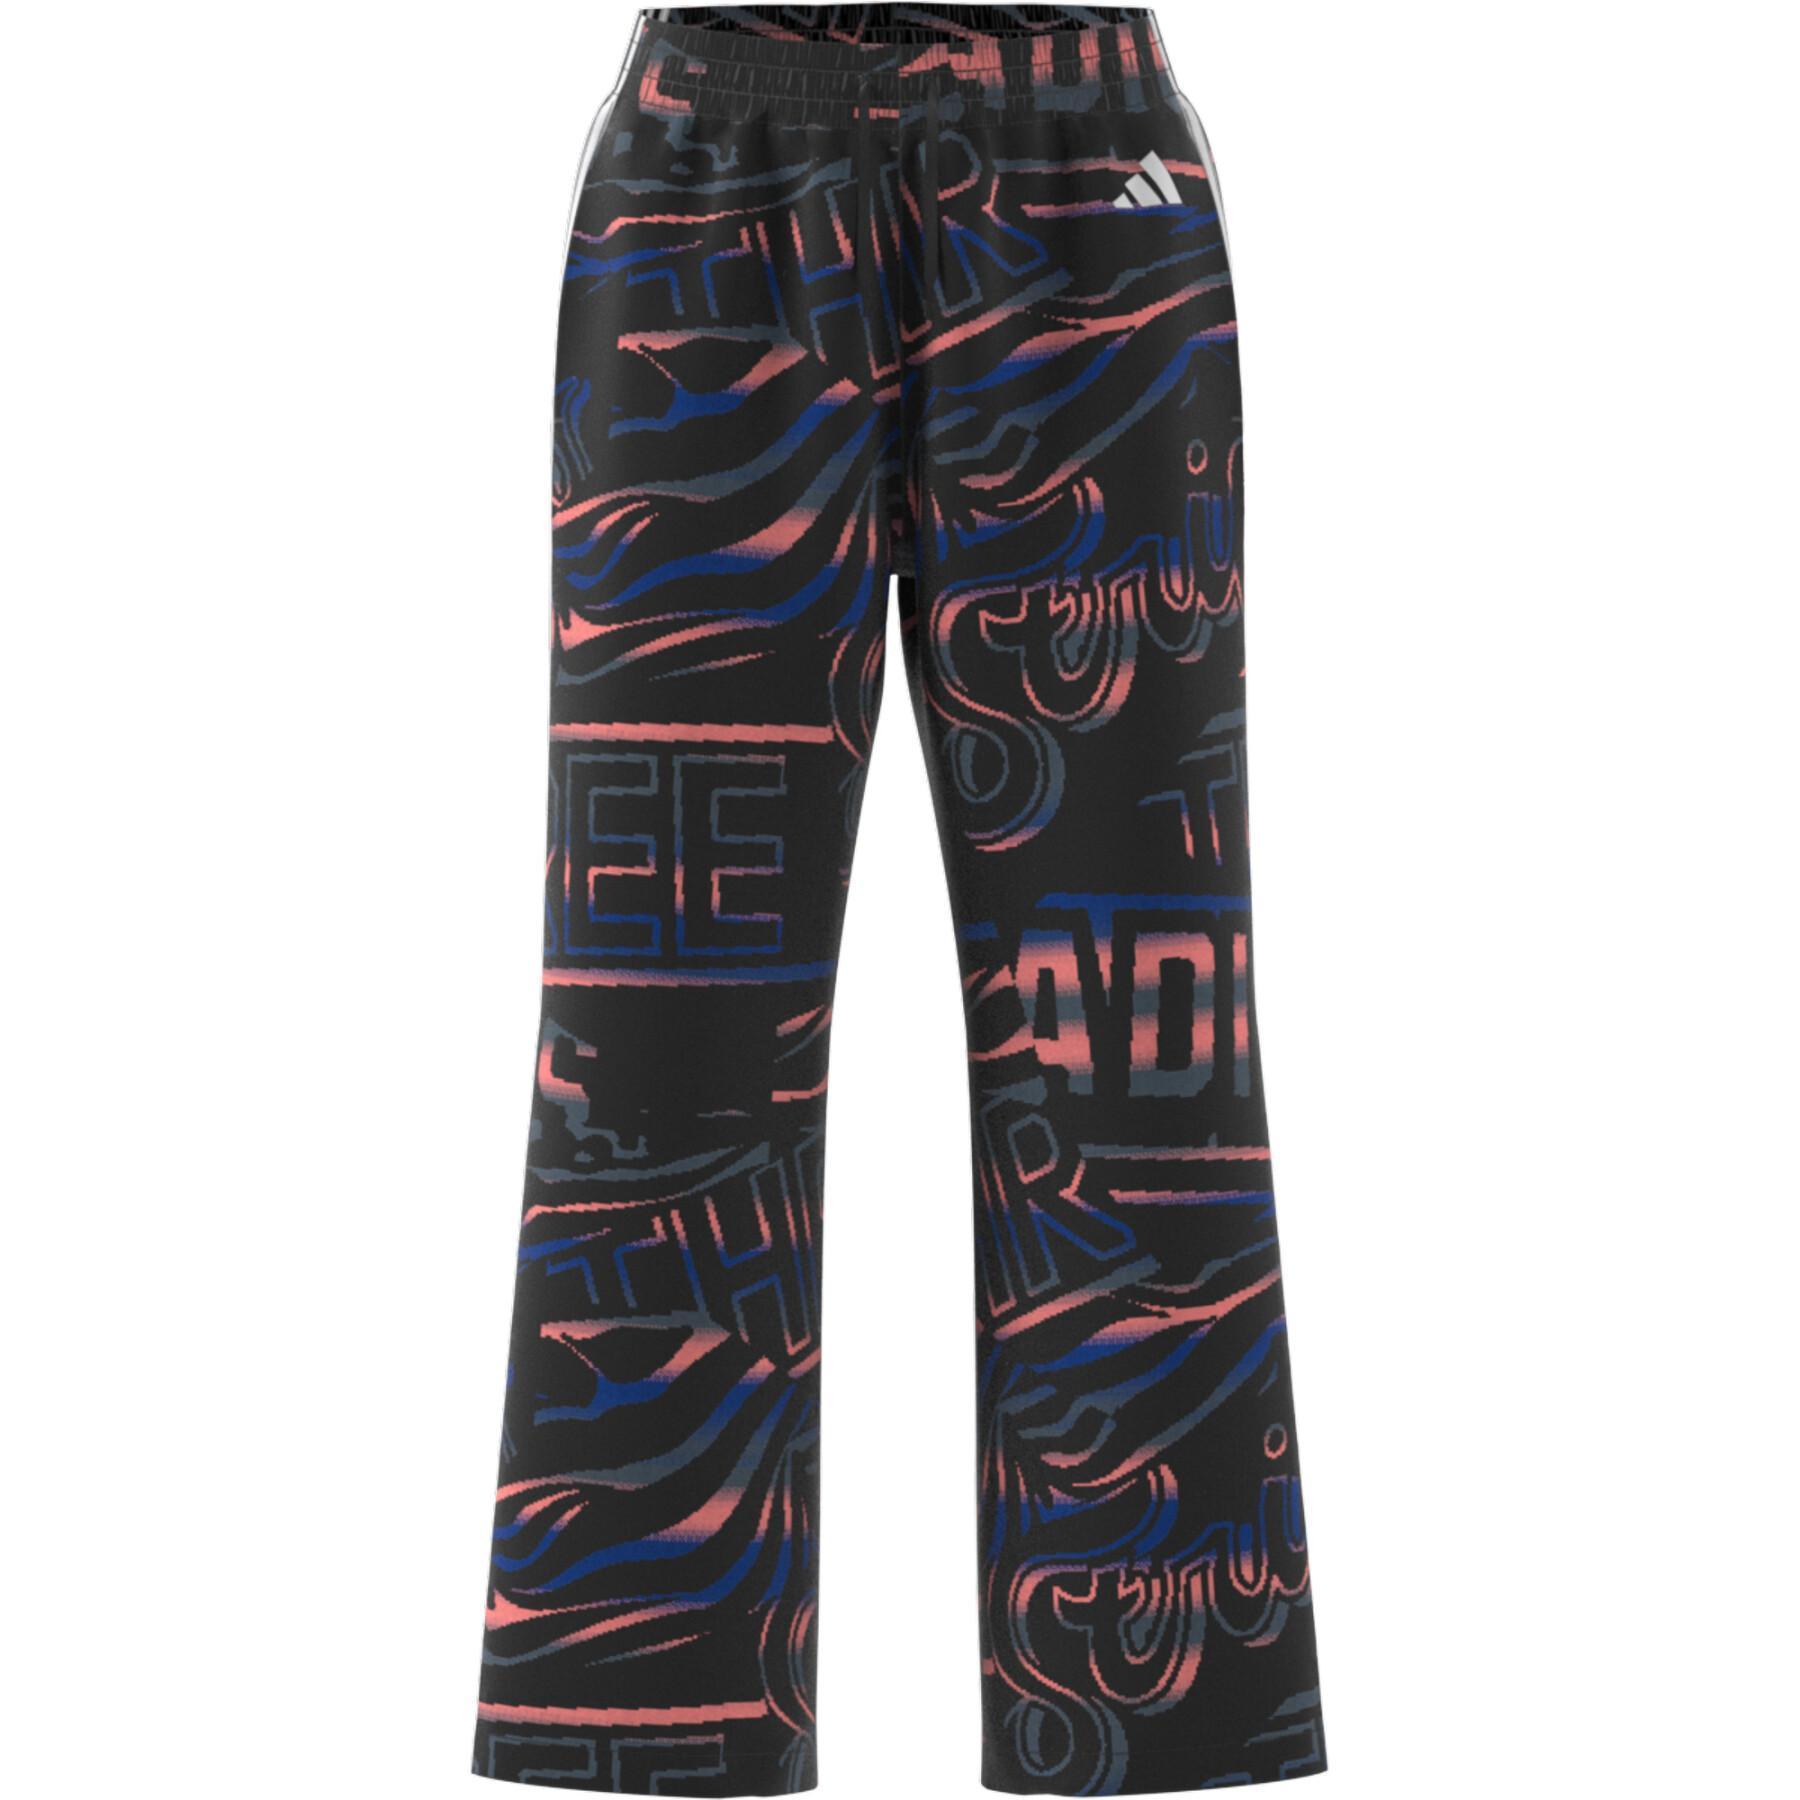 Women's trousers adidas Allover Print 3-Stripes Wide